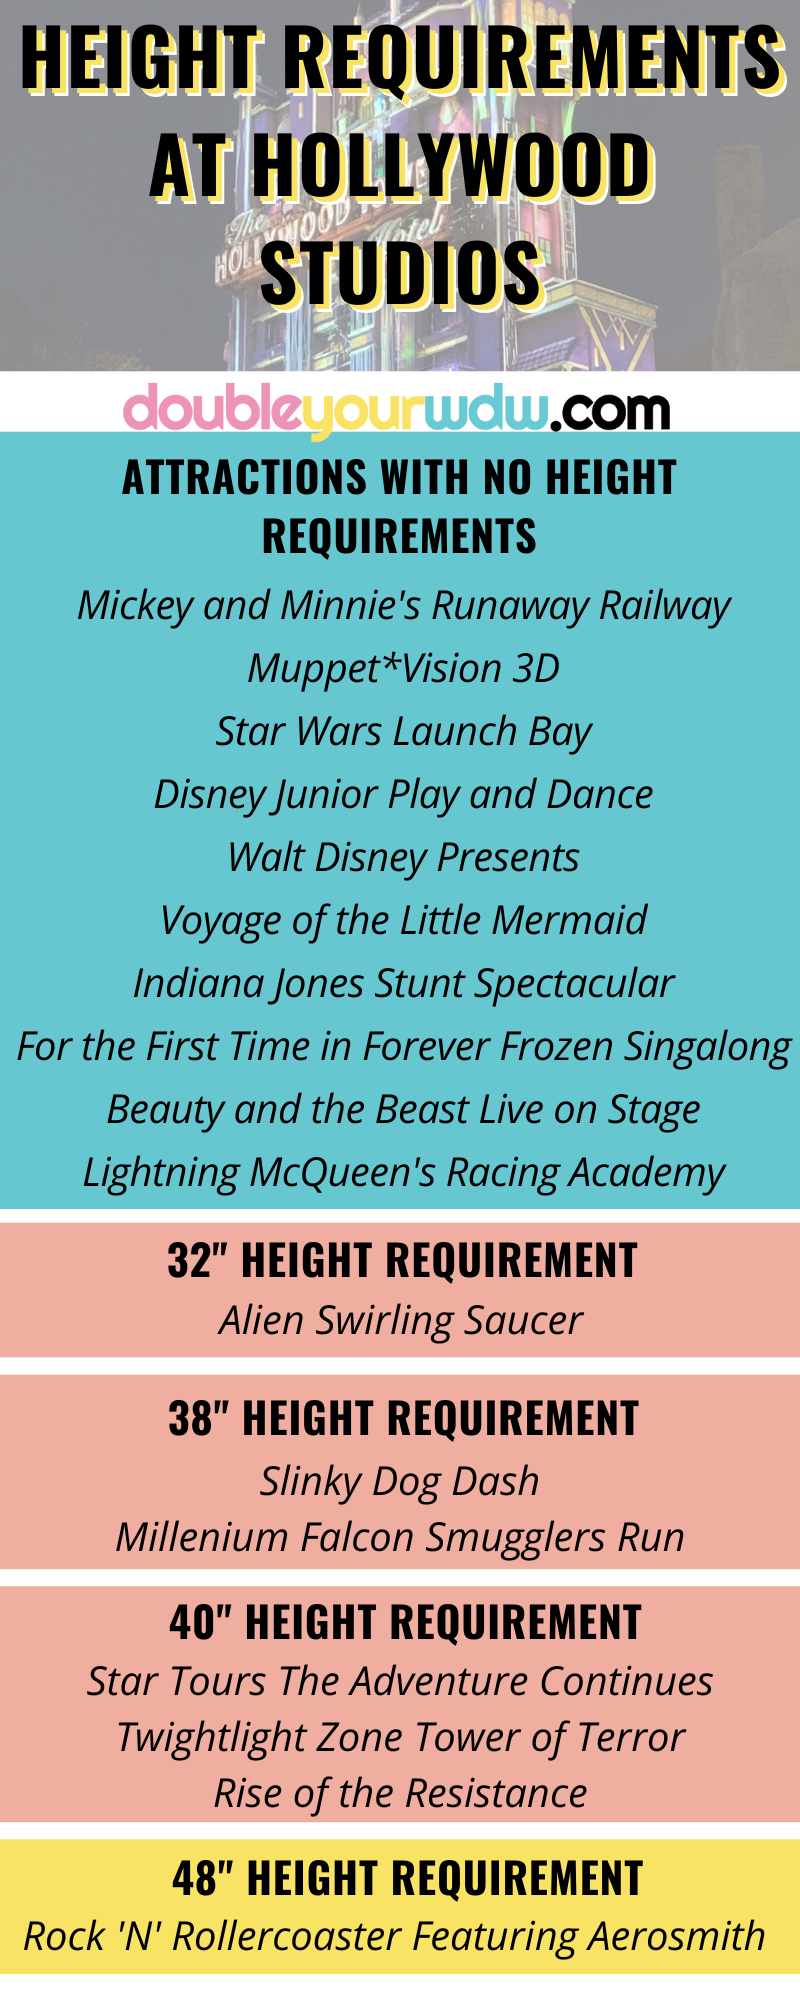 Hollywood Studios height requirements